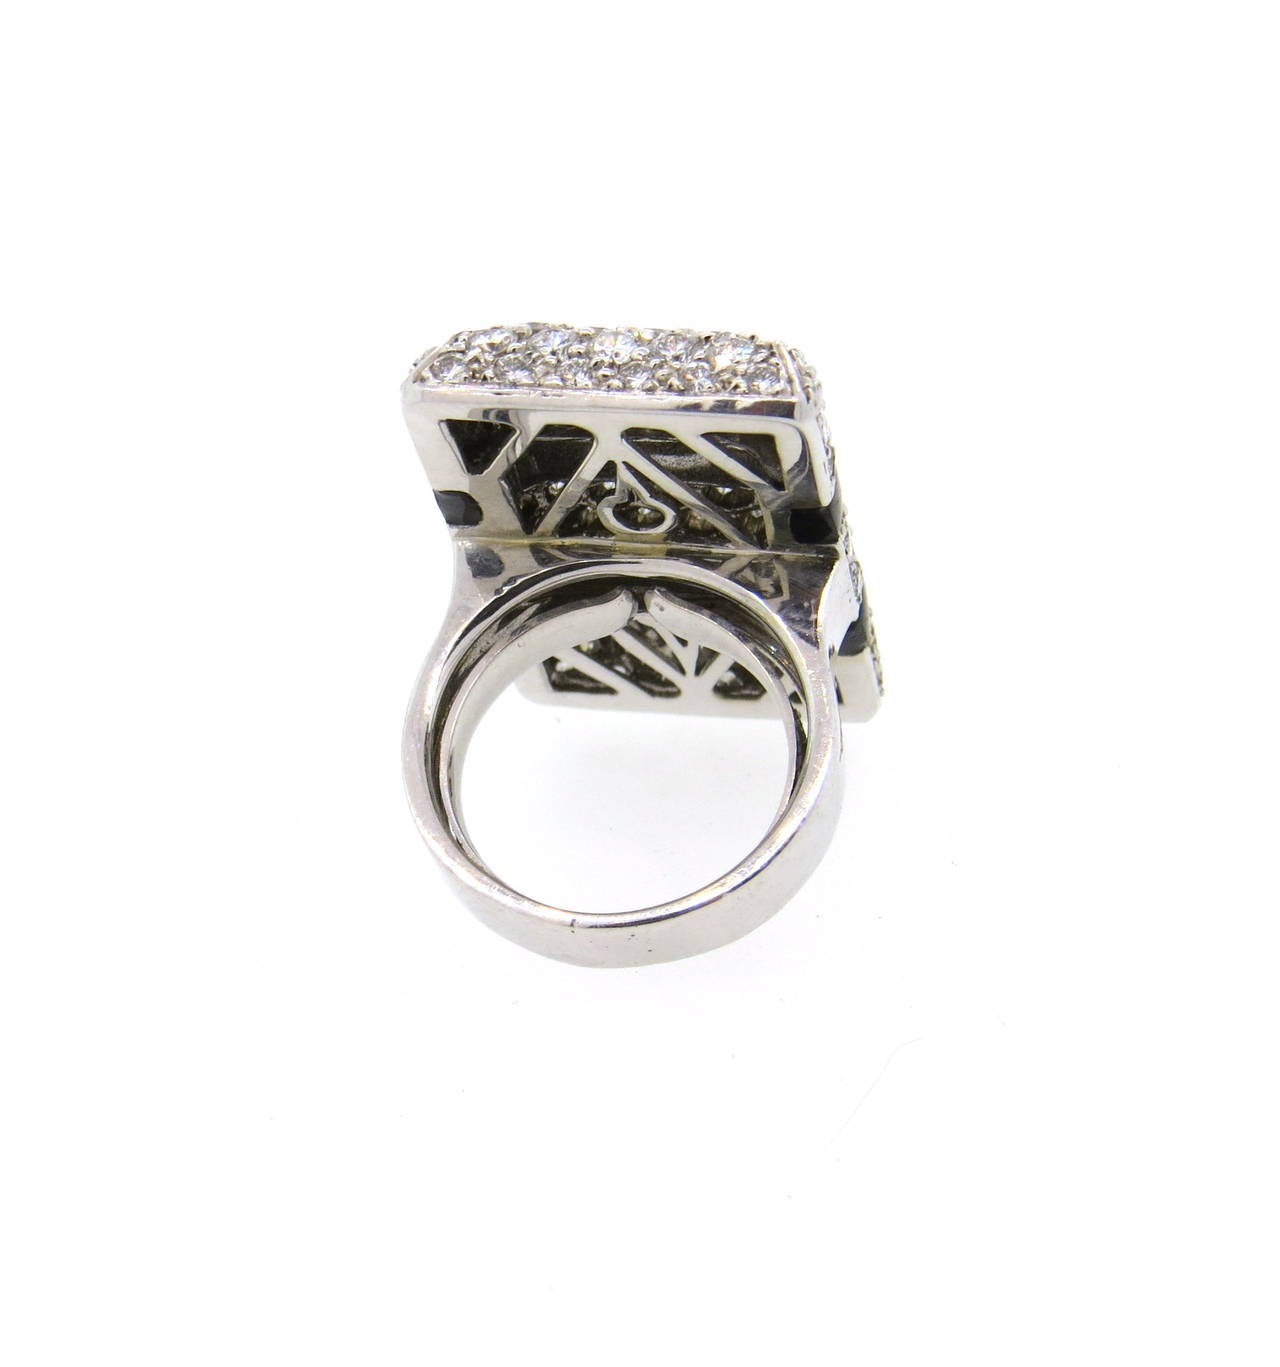 An 18k white gold cocktail ring set with approximately 5.50ctw of G/VS diamonds and onyx.  The ring is a size 5.5 and the top of the ring measures 30mm x 19mm.  The weight of the piece is 20.8 grams